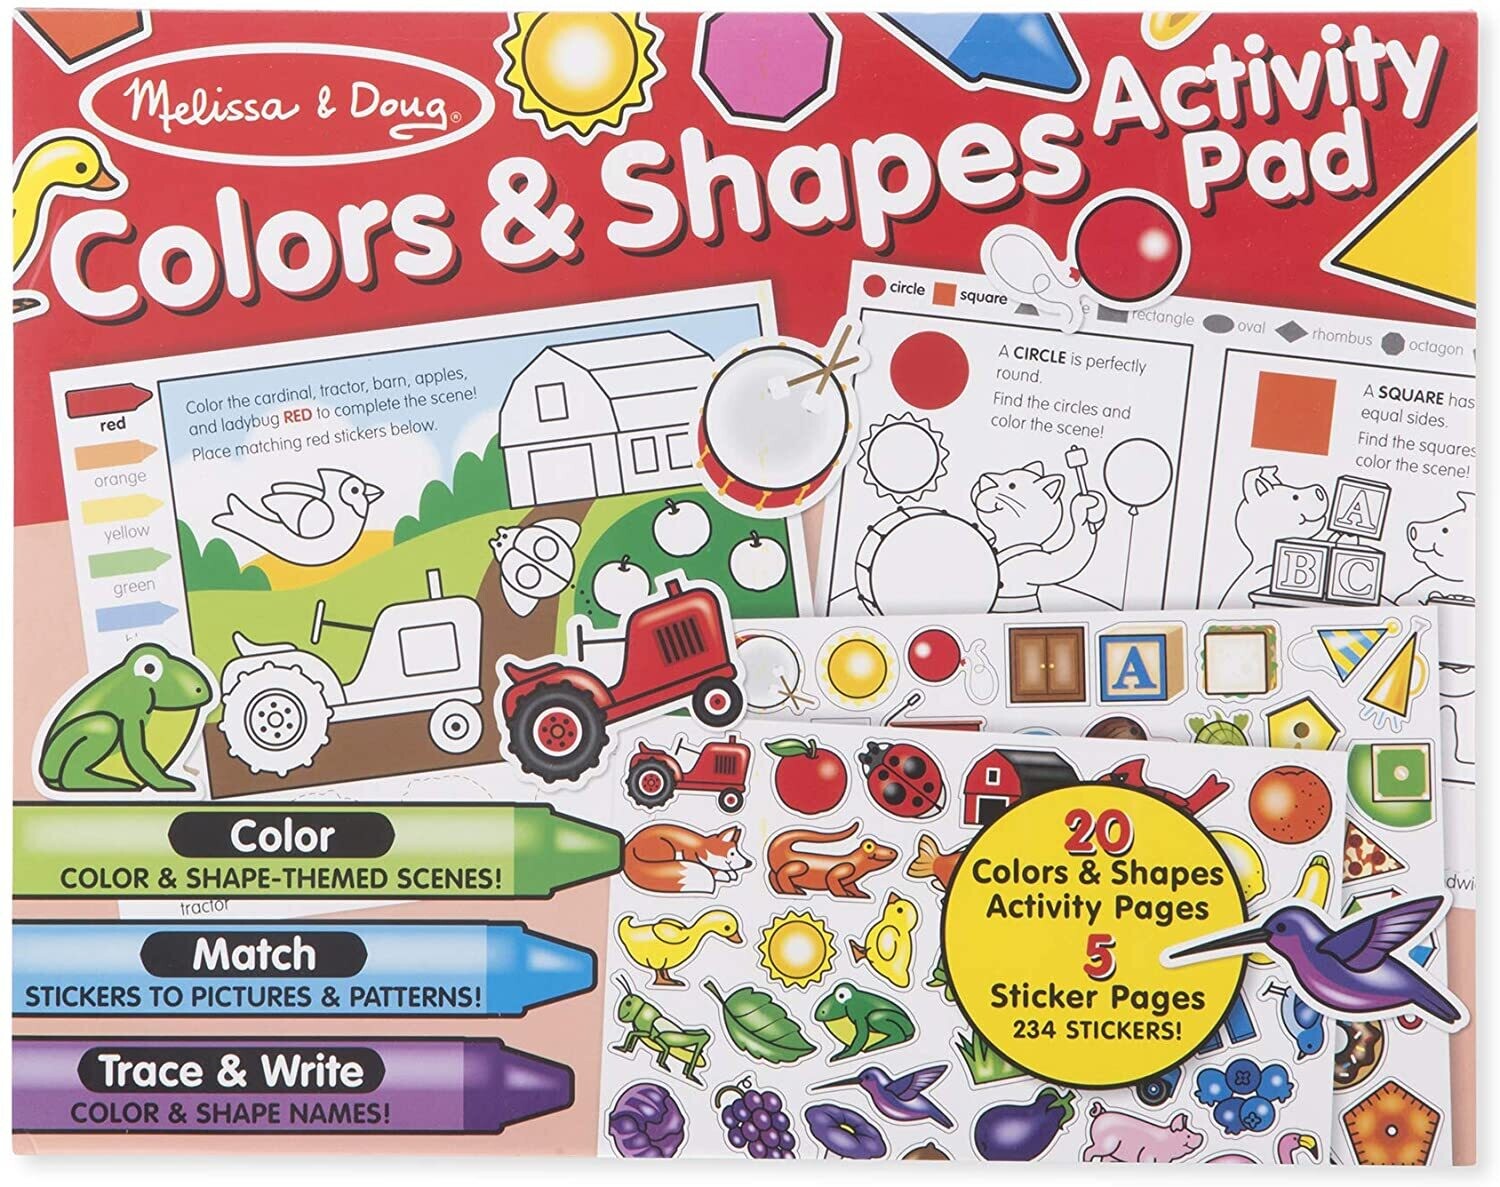 MD 8564 Colors & Shapes Activity Pad